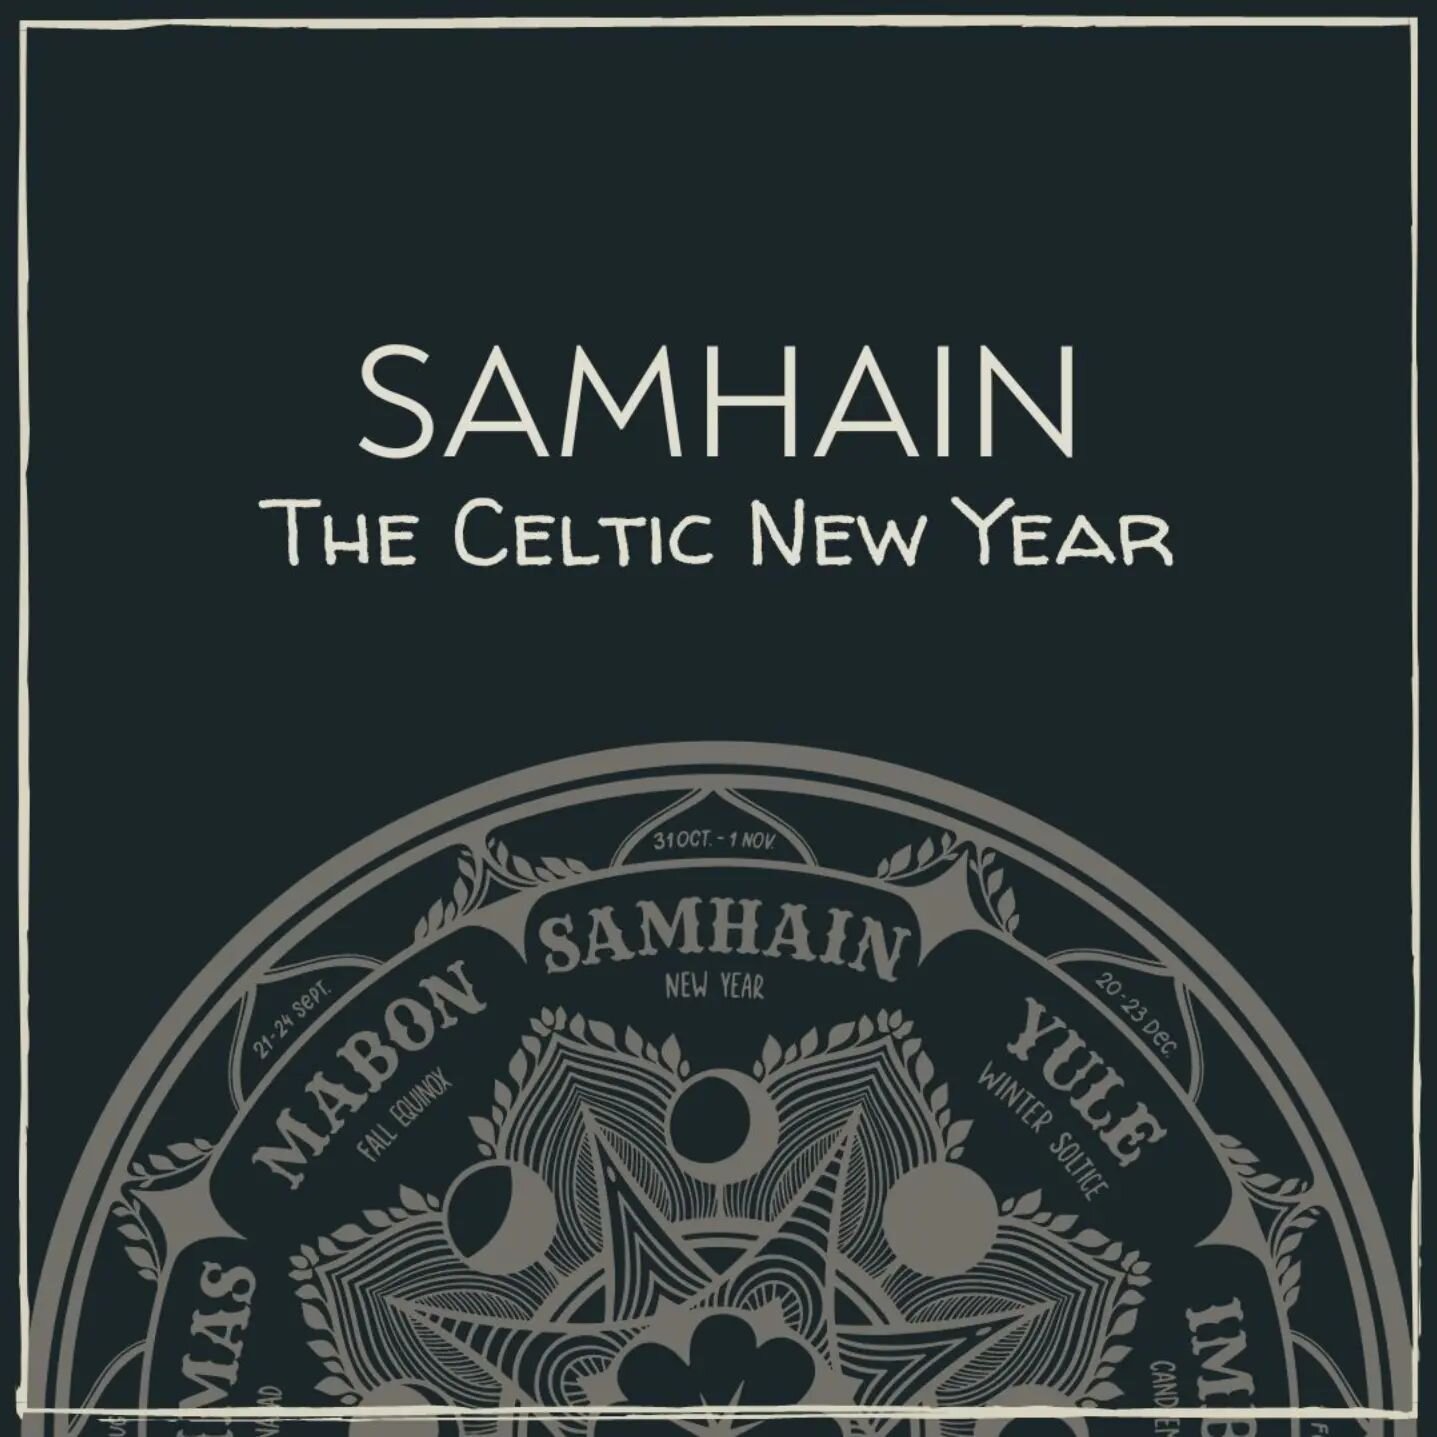 Samhain (pronounced SAH-win) is almost upon us. This is a Gaelic festival that marks the beginning of the new year for the Celts. Samhain begins on October 31st and ends on the evening of November 1. 

Want to celebrate with me? All newsletter subscr